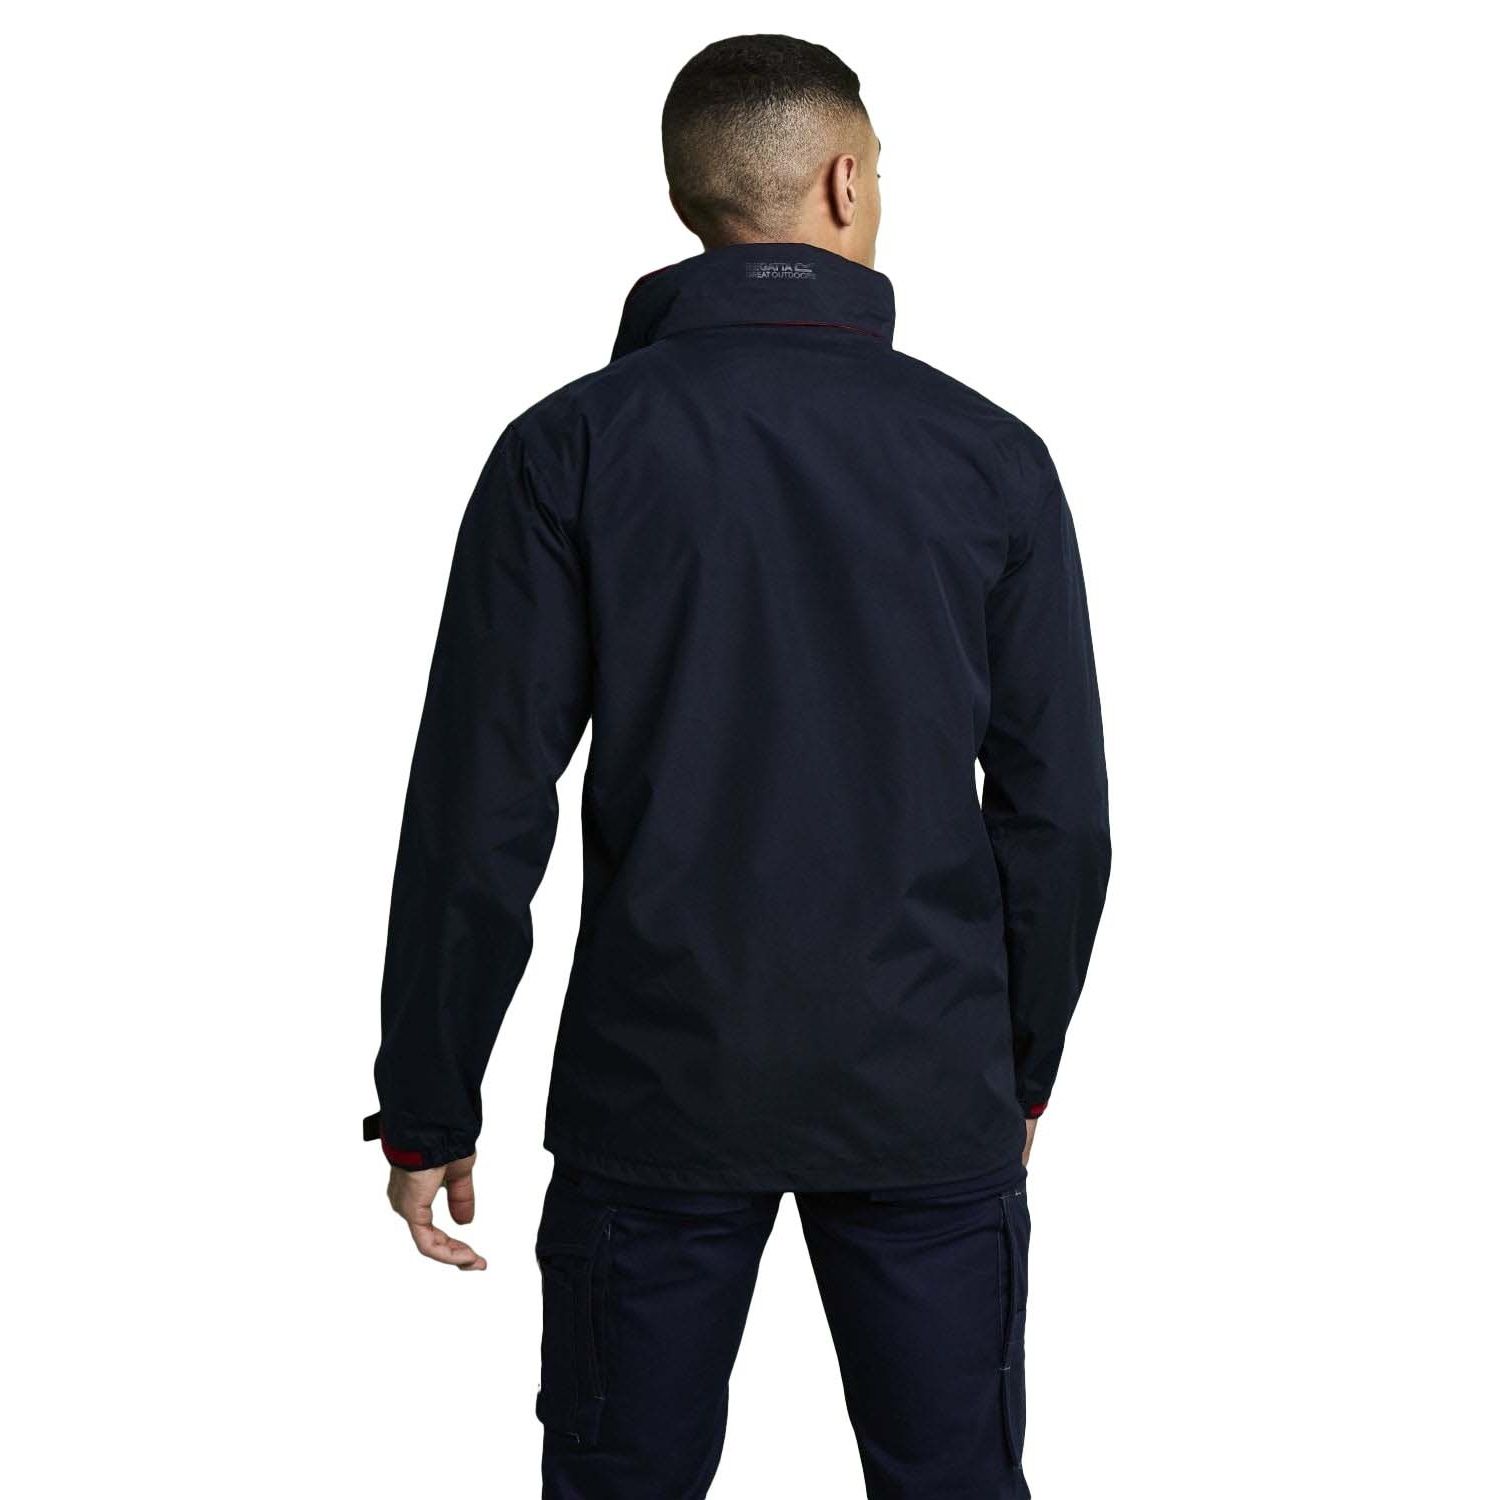 100% hydrafort polyester. Polyester mesh lined. Windproof fabric. Taped seams. Concealed hood with adjuster. 2 lower zipped pockets. 1 internal pocket with earphone cord access. Adjustable cuffs. Adjustable shockcord hem. Internal zipped embroidery access. Regatta Mens sizing (chest approx): XS (35-36in/89-91.5cm), S (37-38in/94-96.5cm), M (39-40in/99-101.5cm), L (41-42in/104-106.5cm), XL (43-44in/109-112cm), XXL (46-48in/117-122cm), XXXL (49-51in/124.5-129.5cm), XXXXL (52-54in/132-137cm), XXXXXL (55-57in/140-145cm).